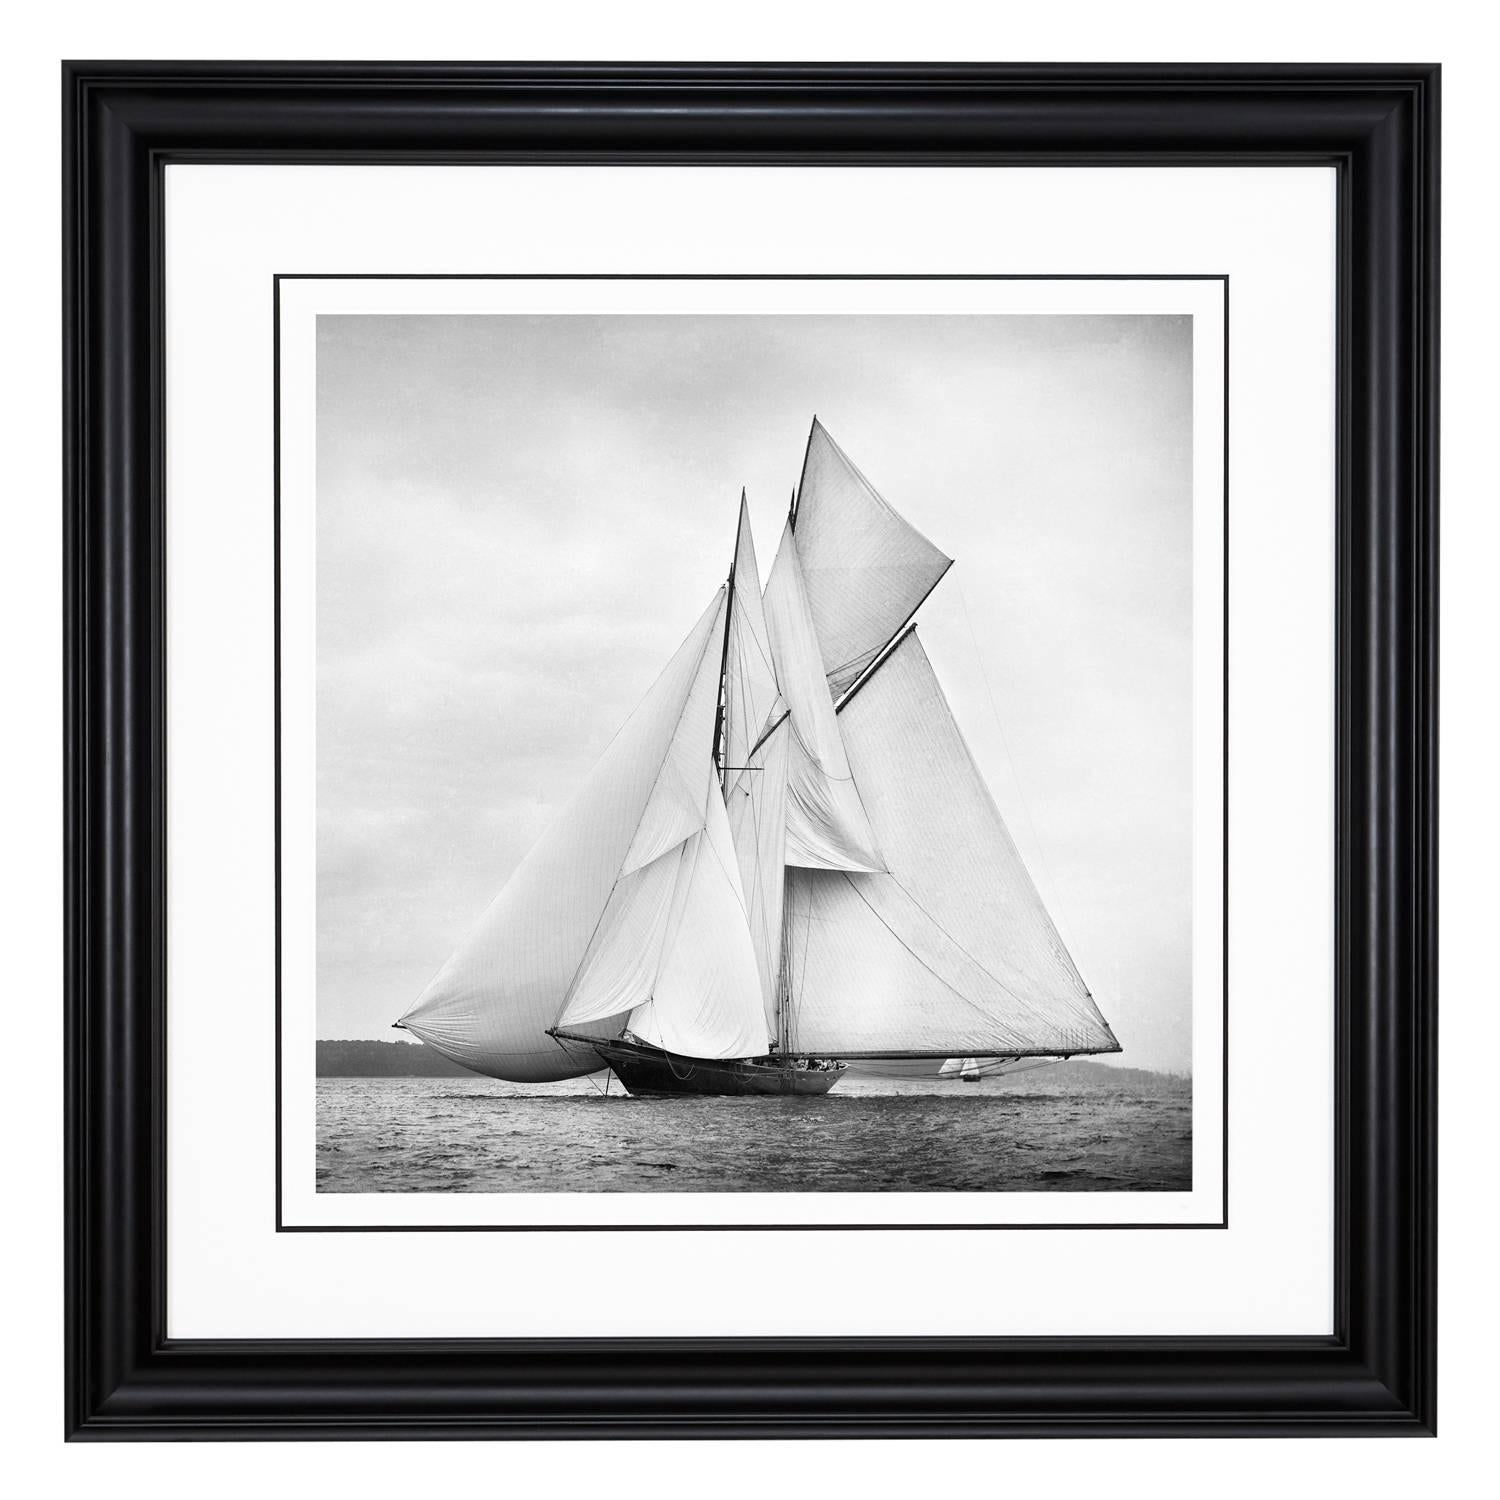 Sailing Yacht Rainbow, 1898 - Edition 1 of 25  - Photograph by Alfred John West